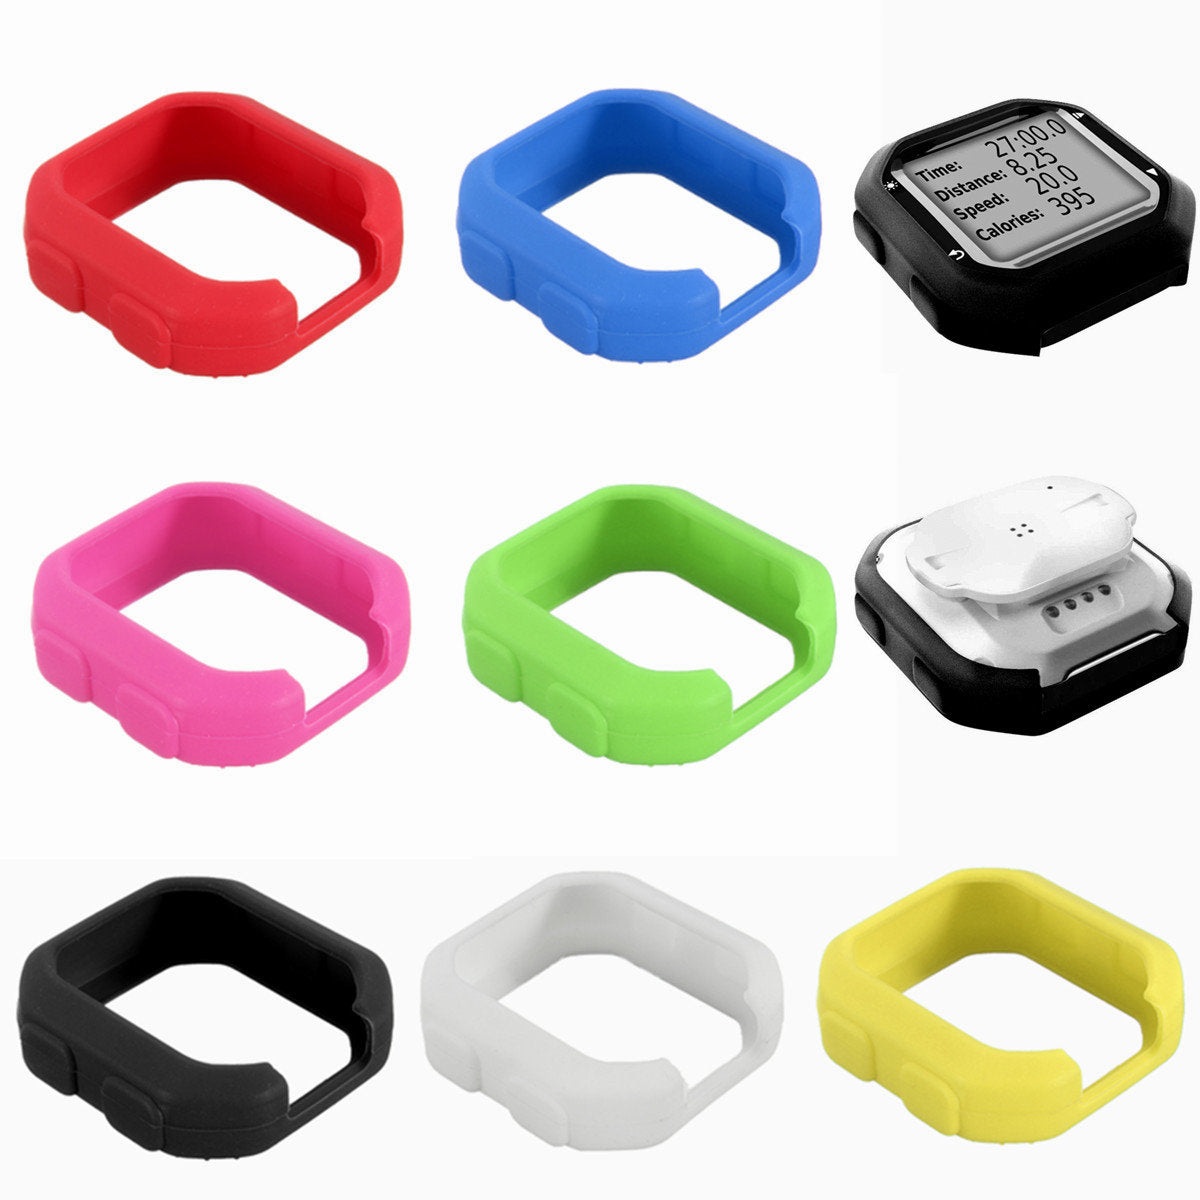 Bike Cycling Silicone Rubber Case Cover Skin For Garmin GPS Edge 20/25 with Sticker